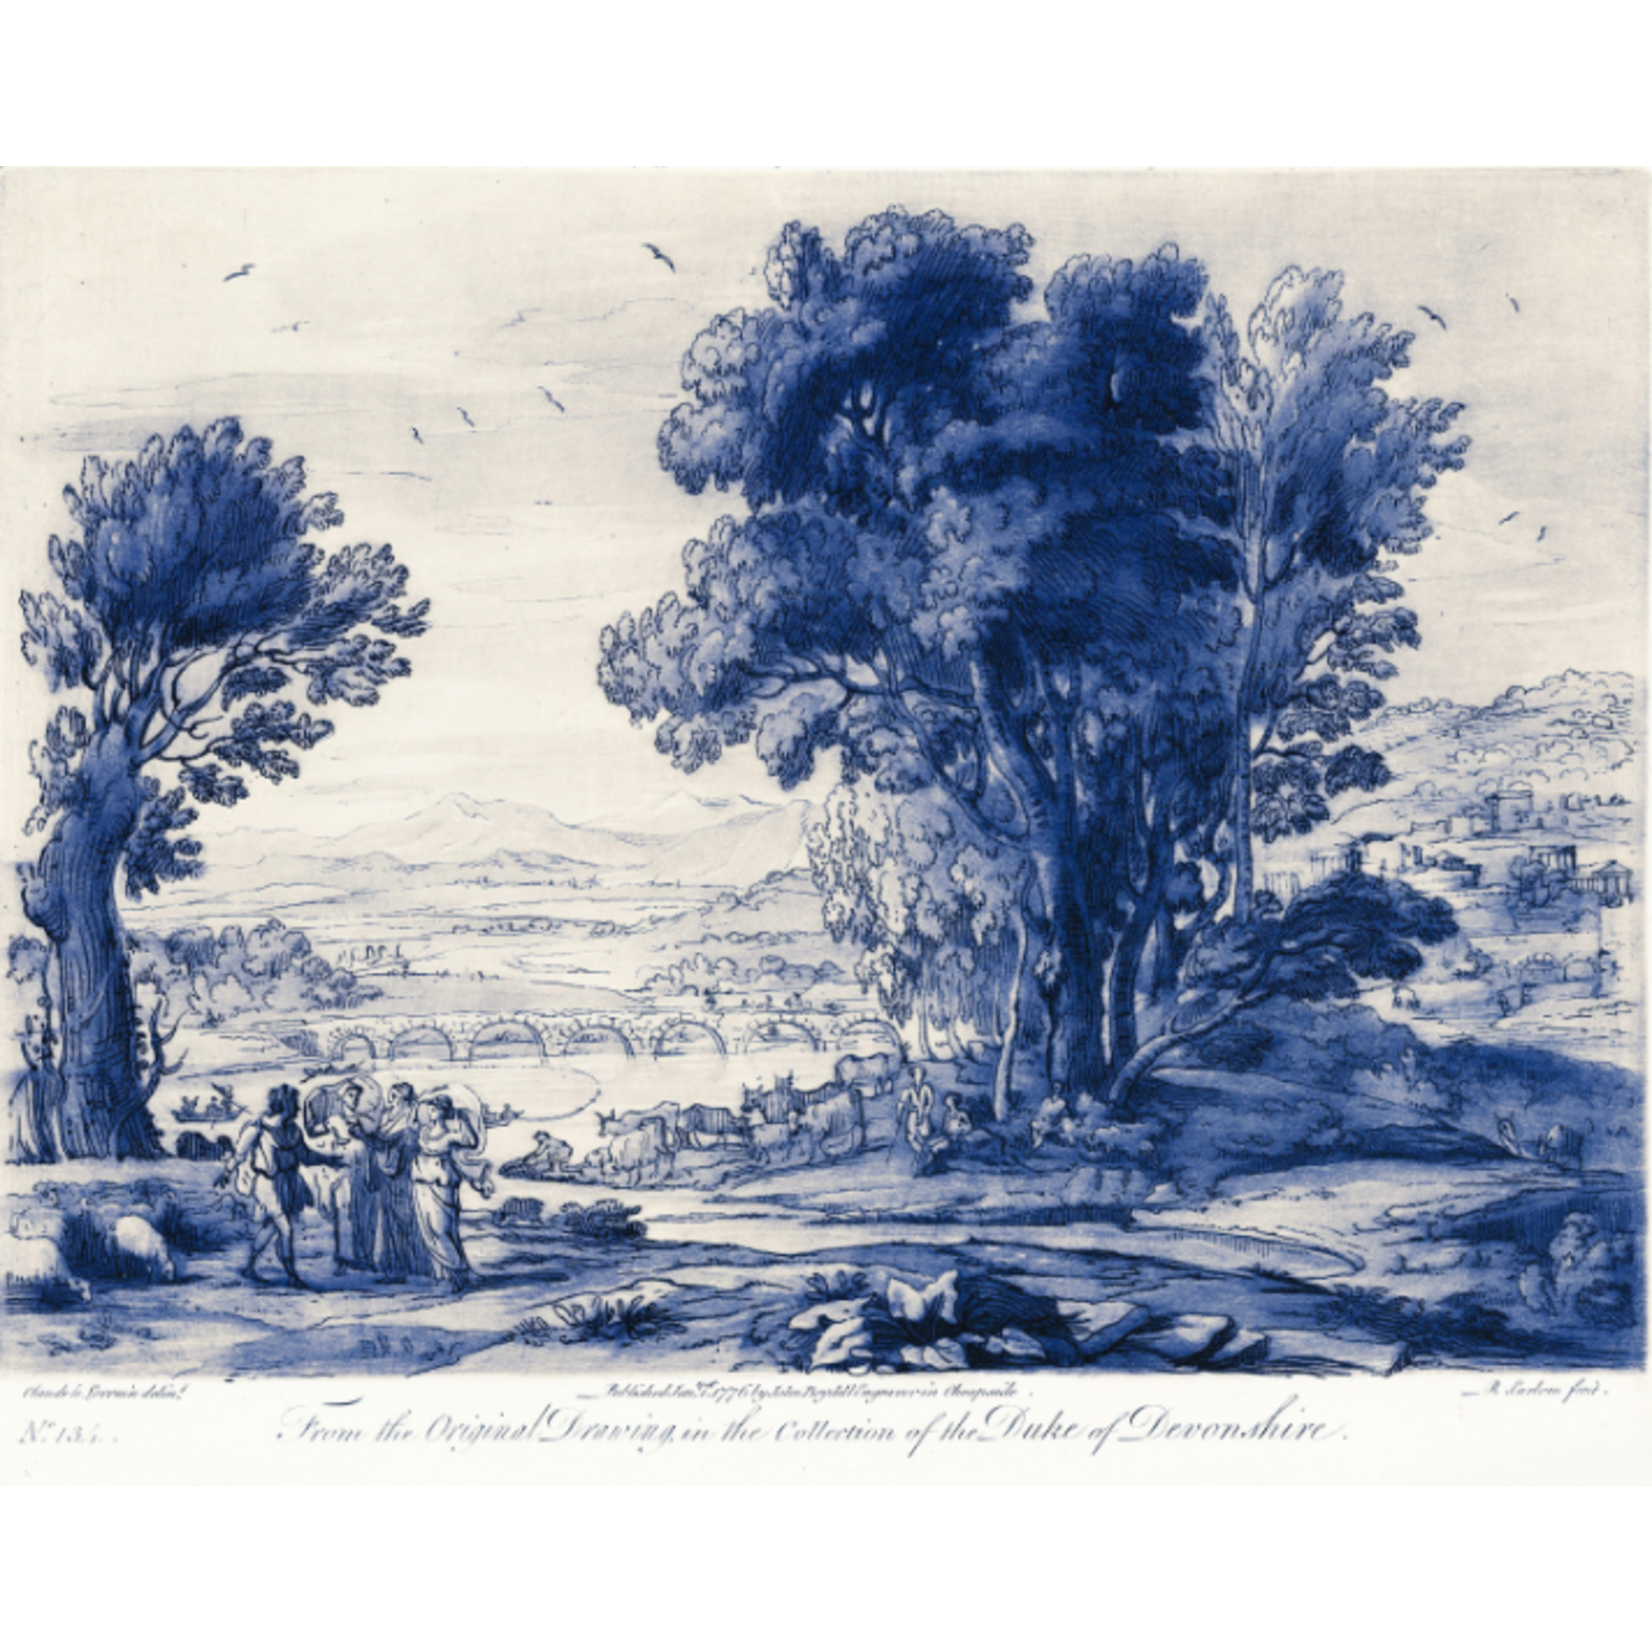 Stretched Print on Canvas Pastoral 2 from the collection of The Duke of Devonshire